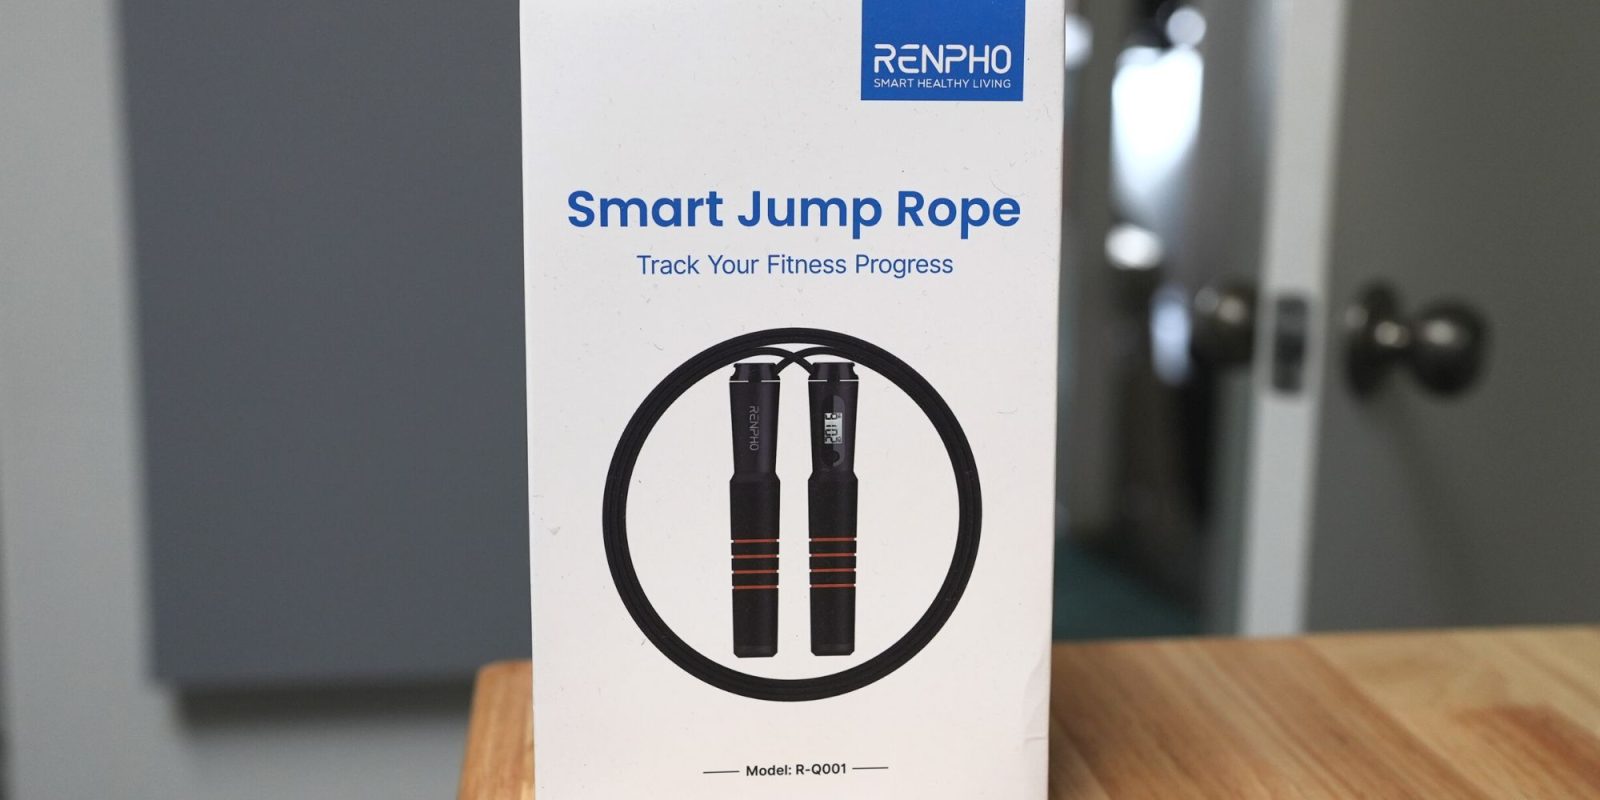 Renpho's Apple Watch-friendly Smart Scale tracks your fitness journey at  $17.50 (Reg. $25+)